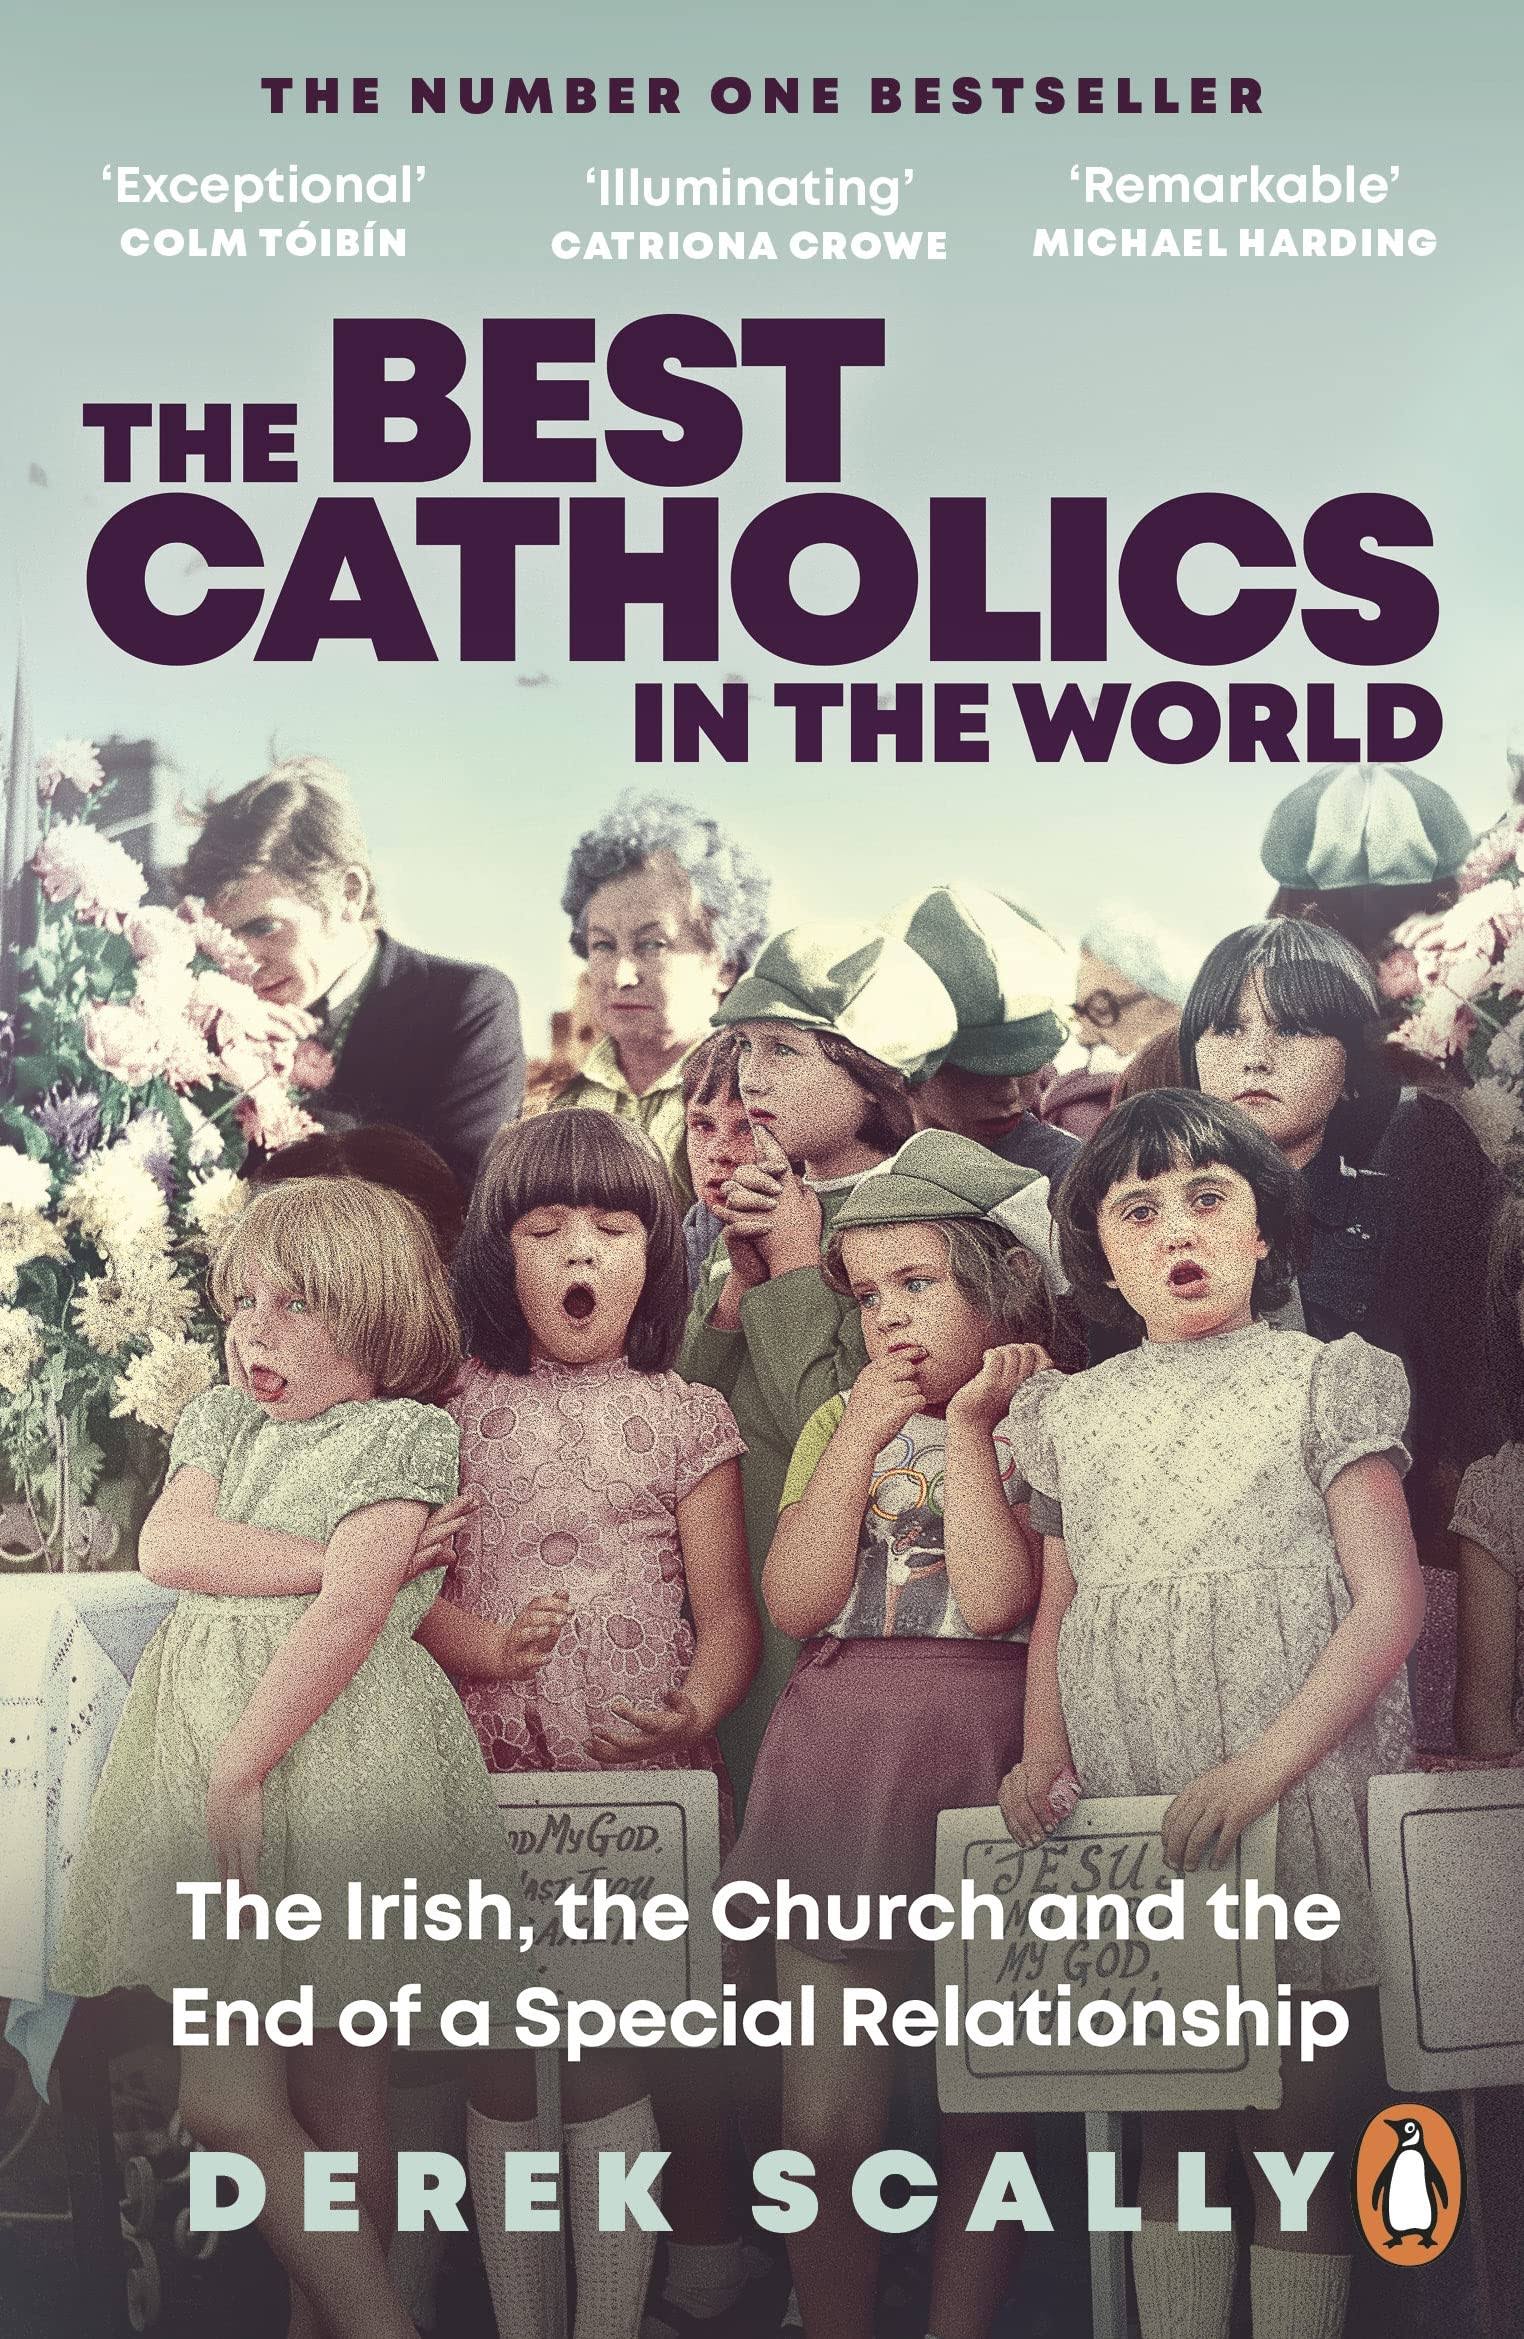 The Best Catholics in the World by Derek Scally